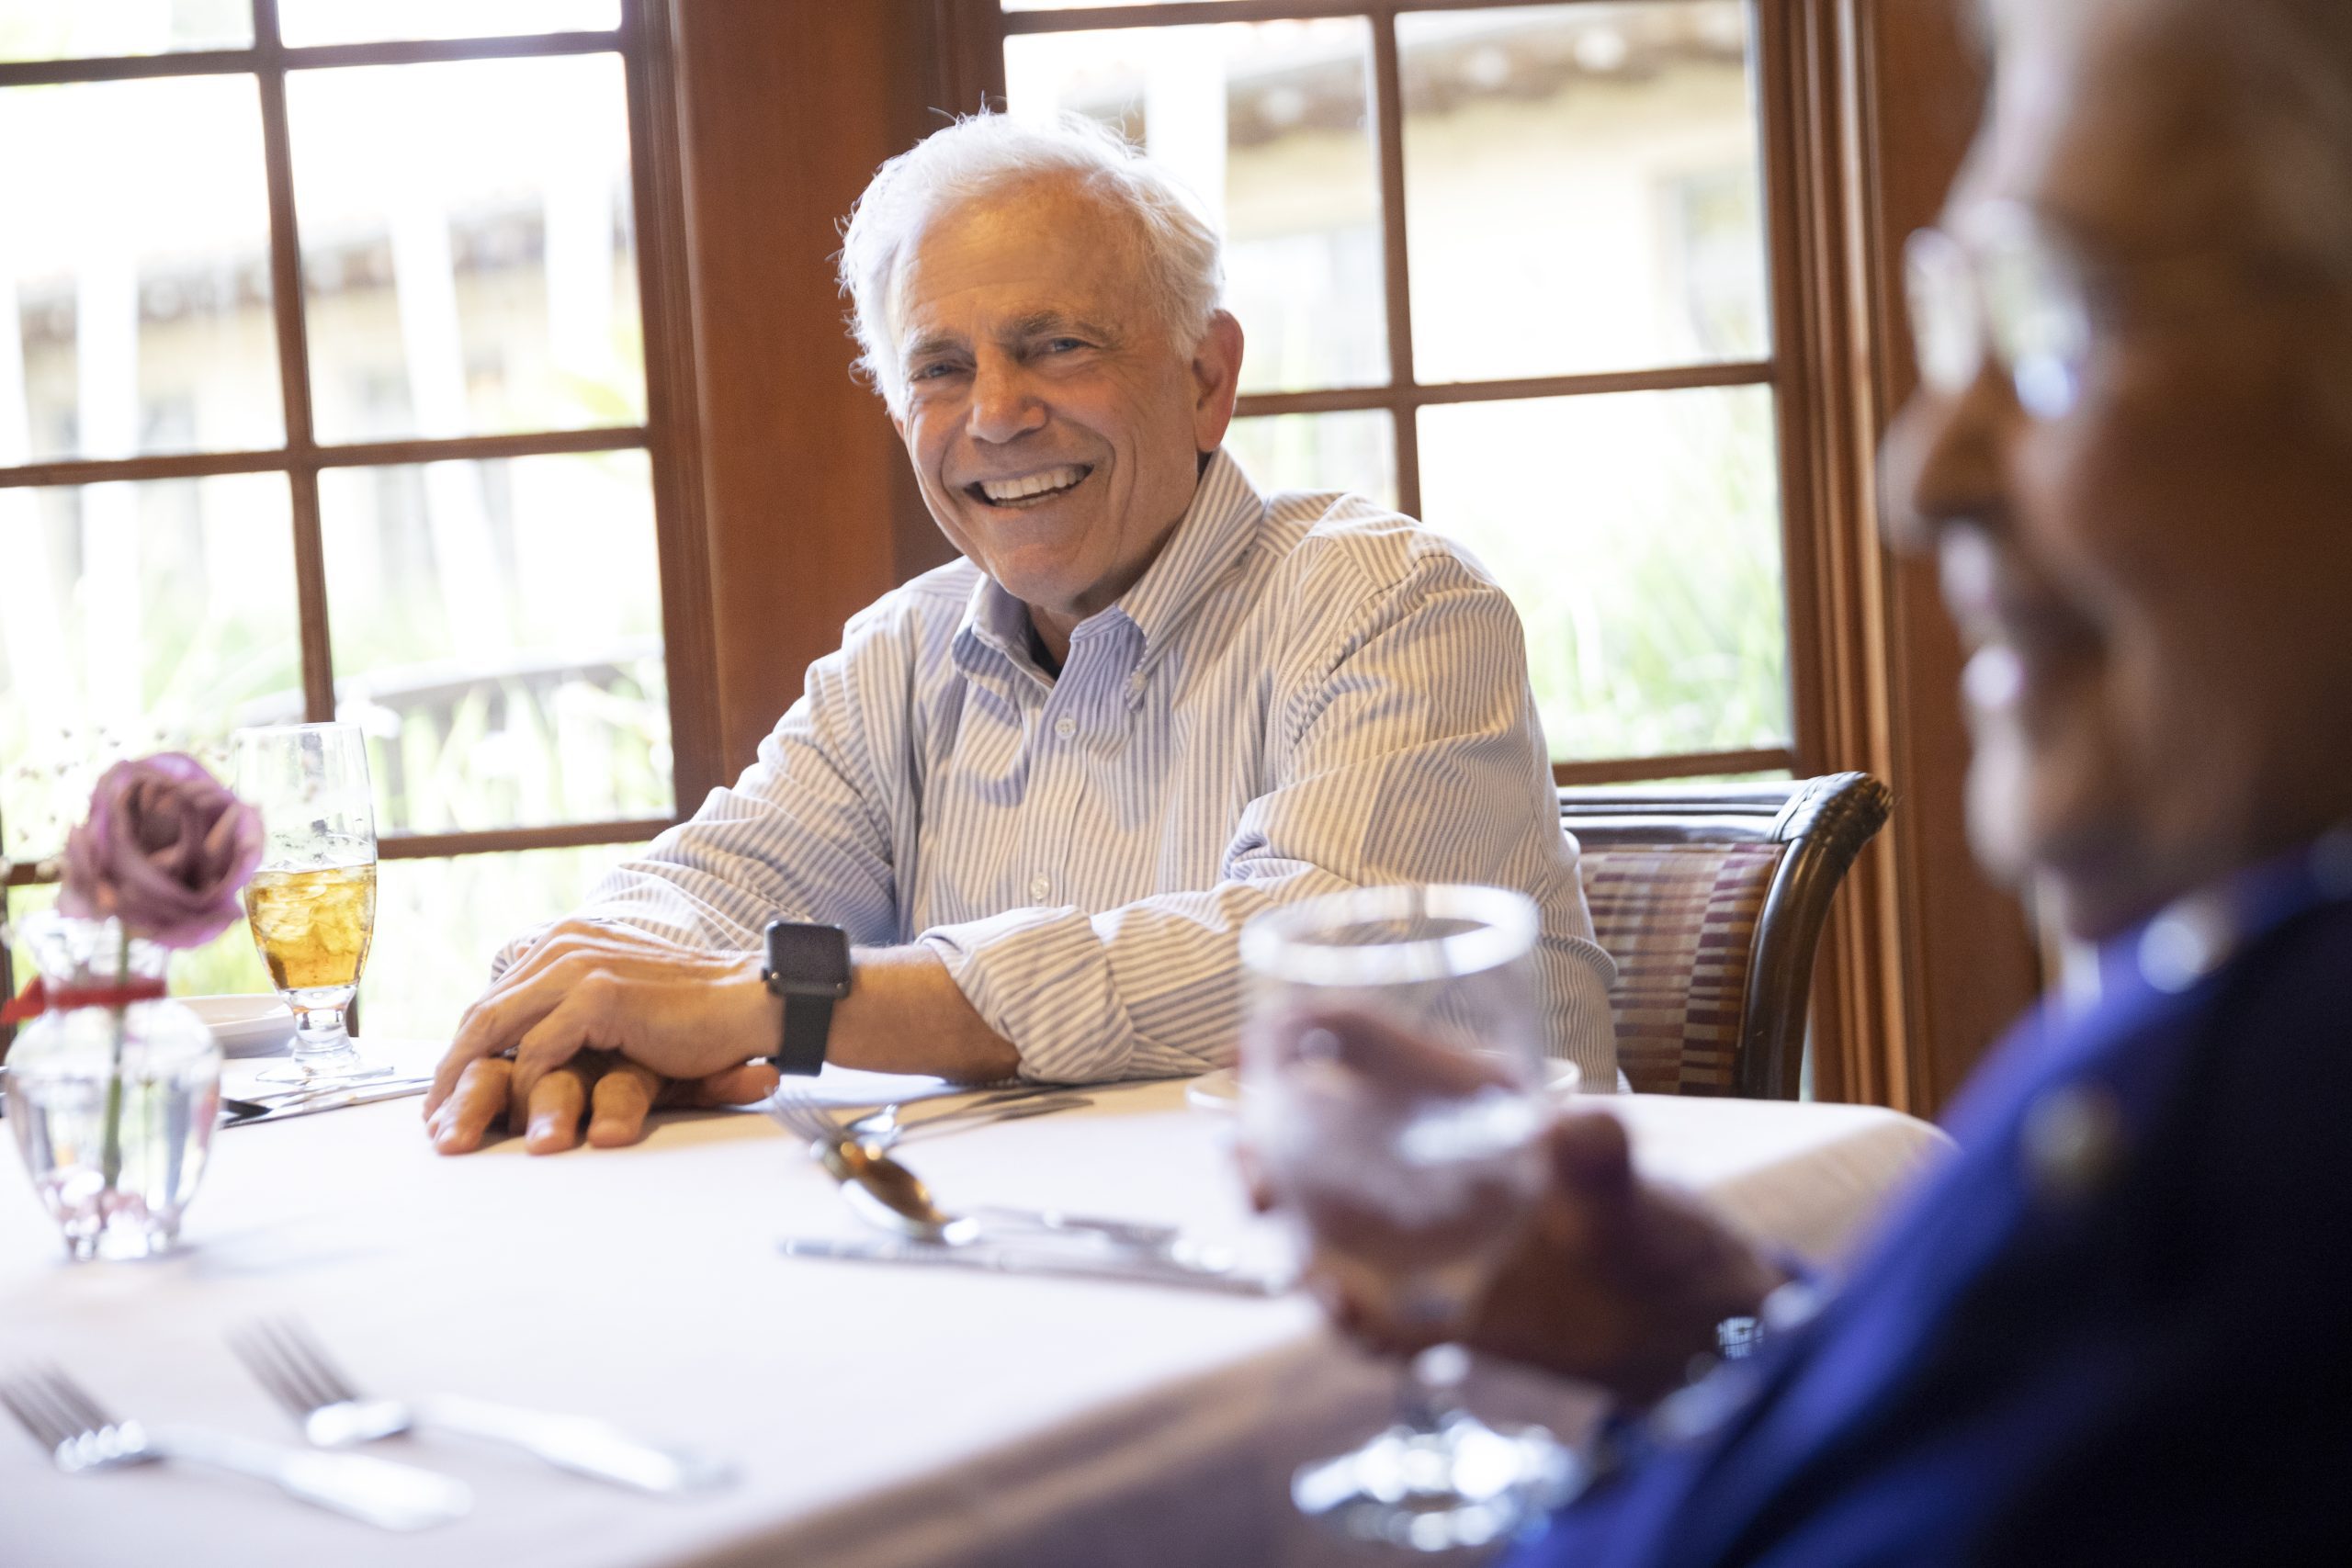 two elderly people smiling and sharing a meal with each other